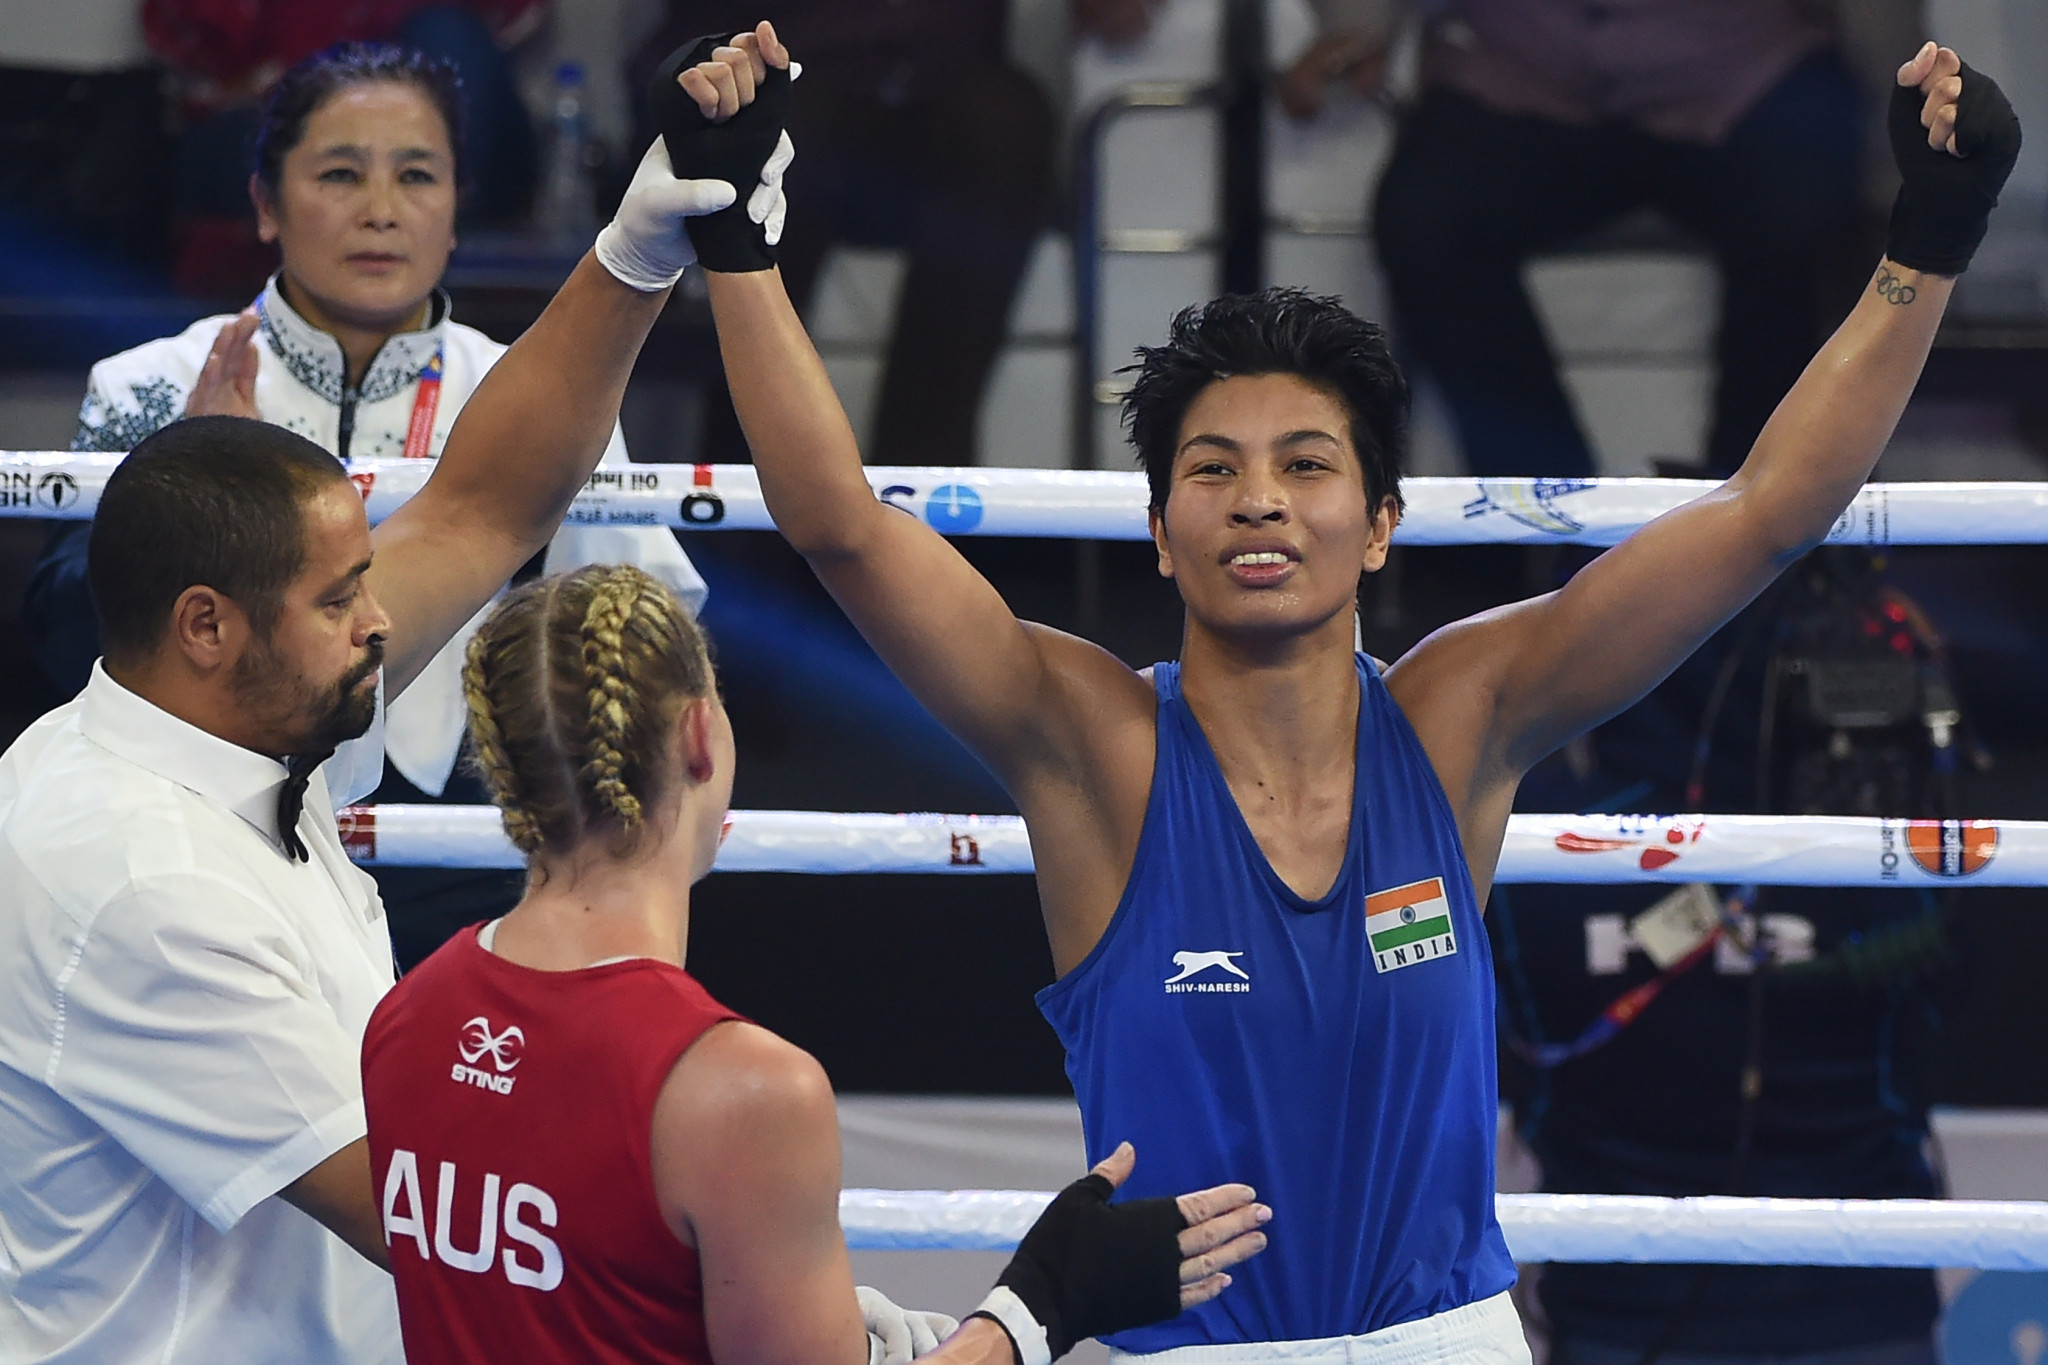 India's Lovlina Borgohain won welterwight bronze the last time the Women's World Championships was held in New Delhi in 2018, but insists she is 